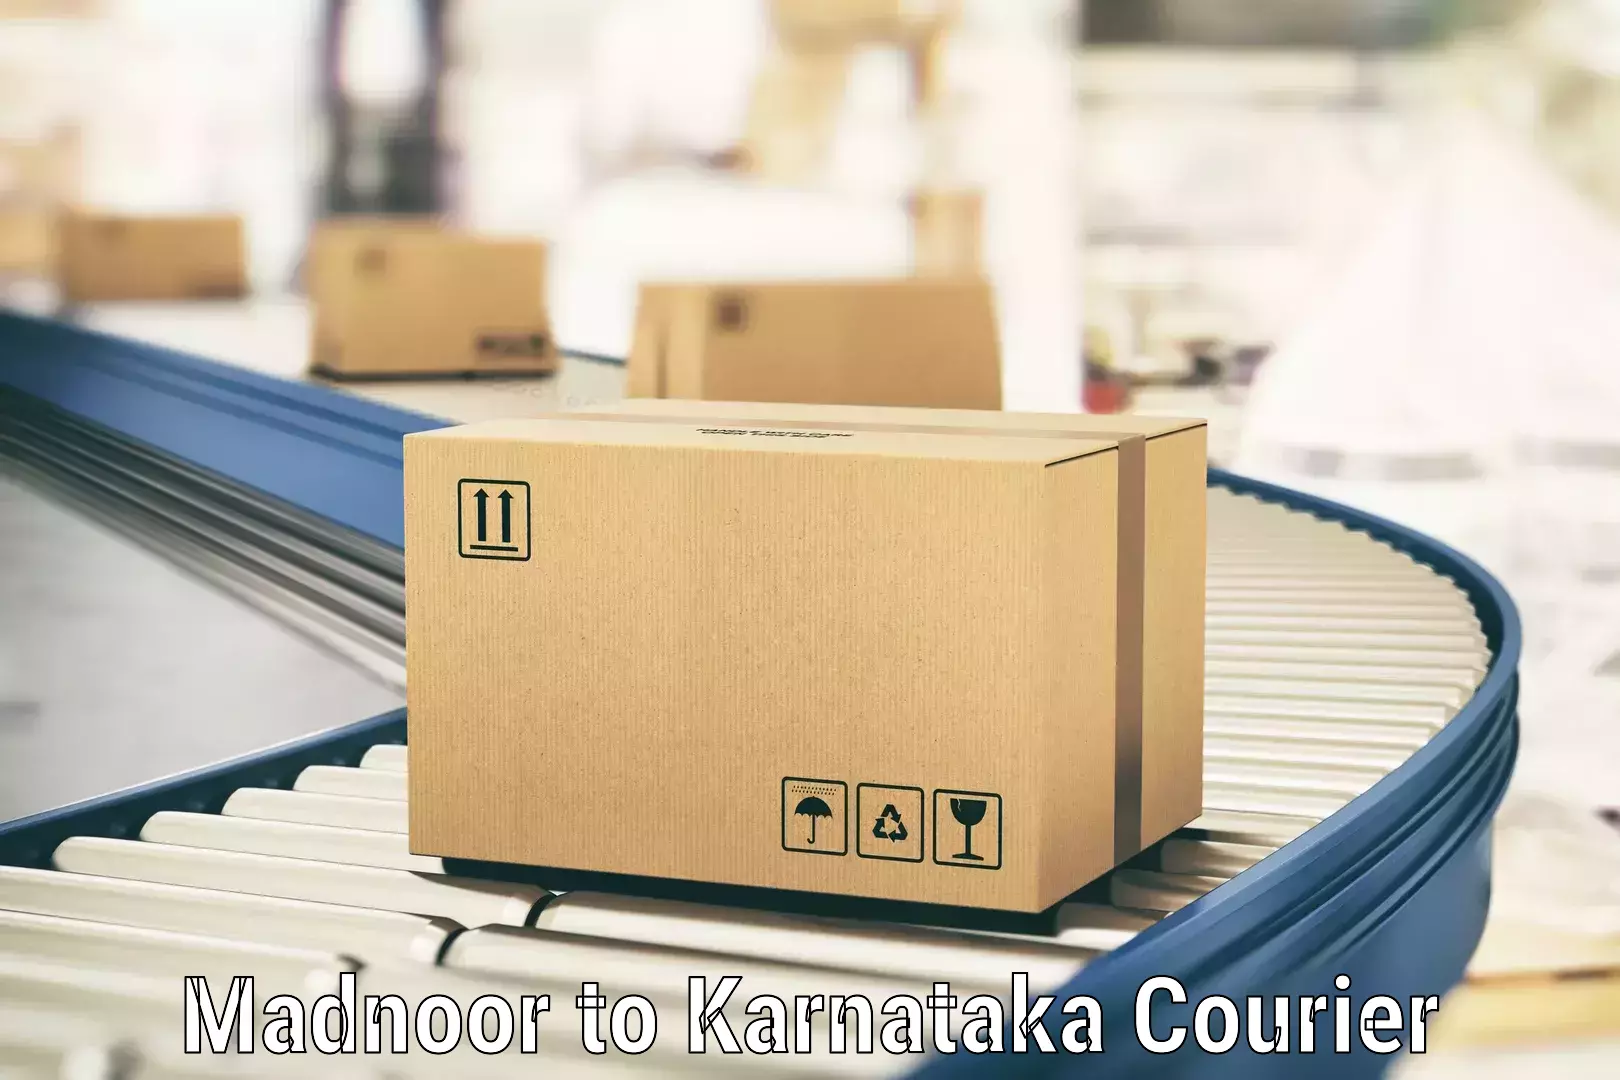 Multi-national courier services in Madnoor to Harohalli